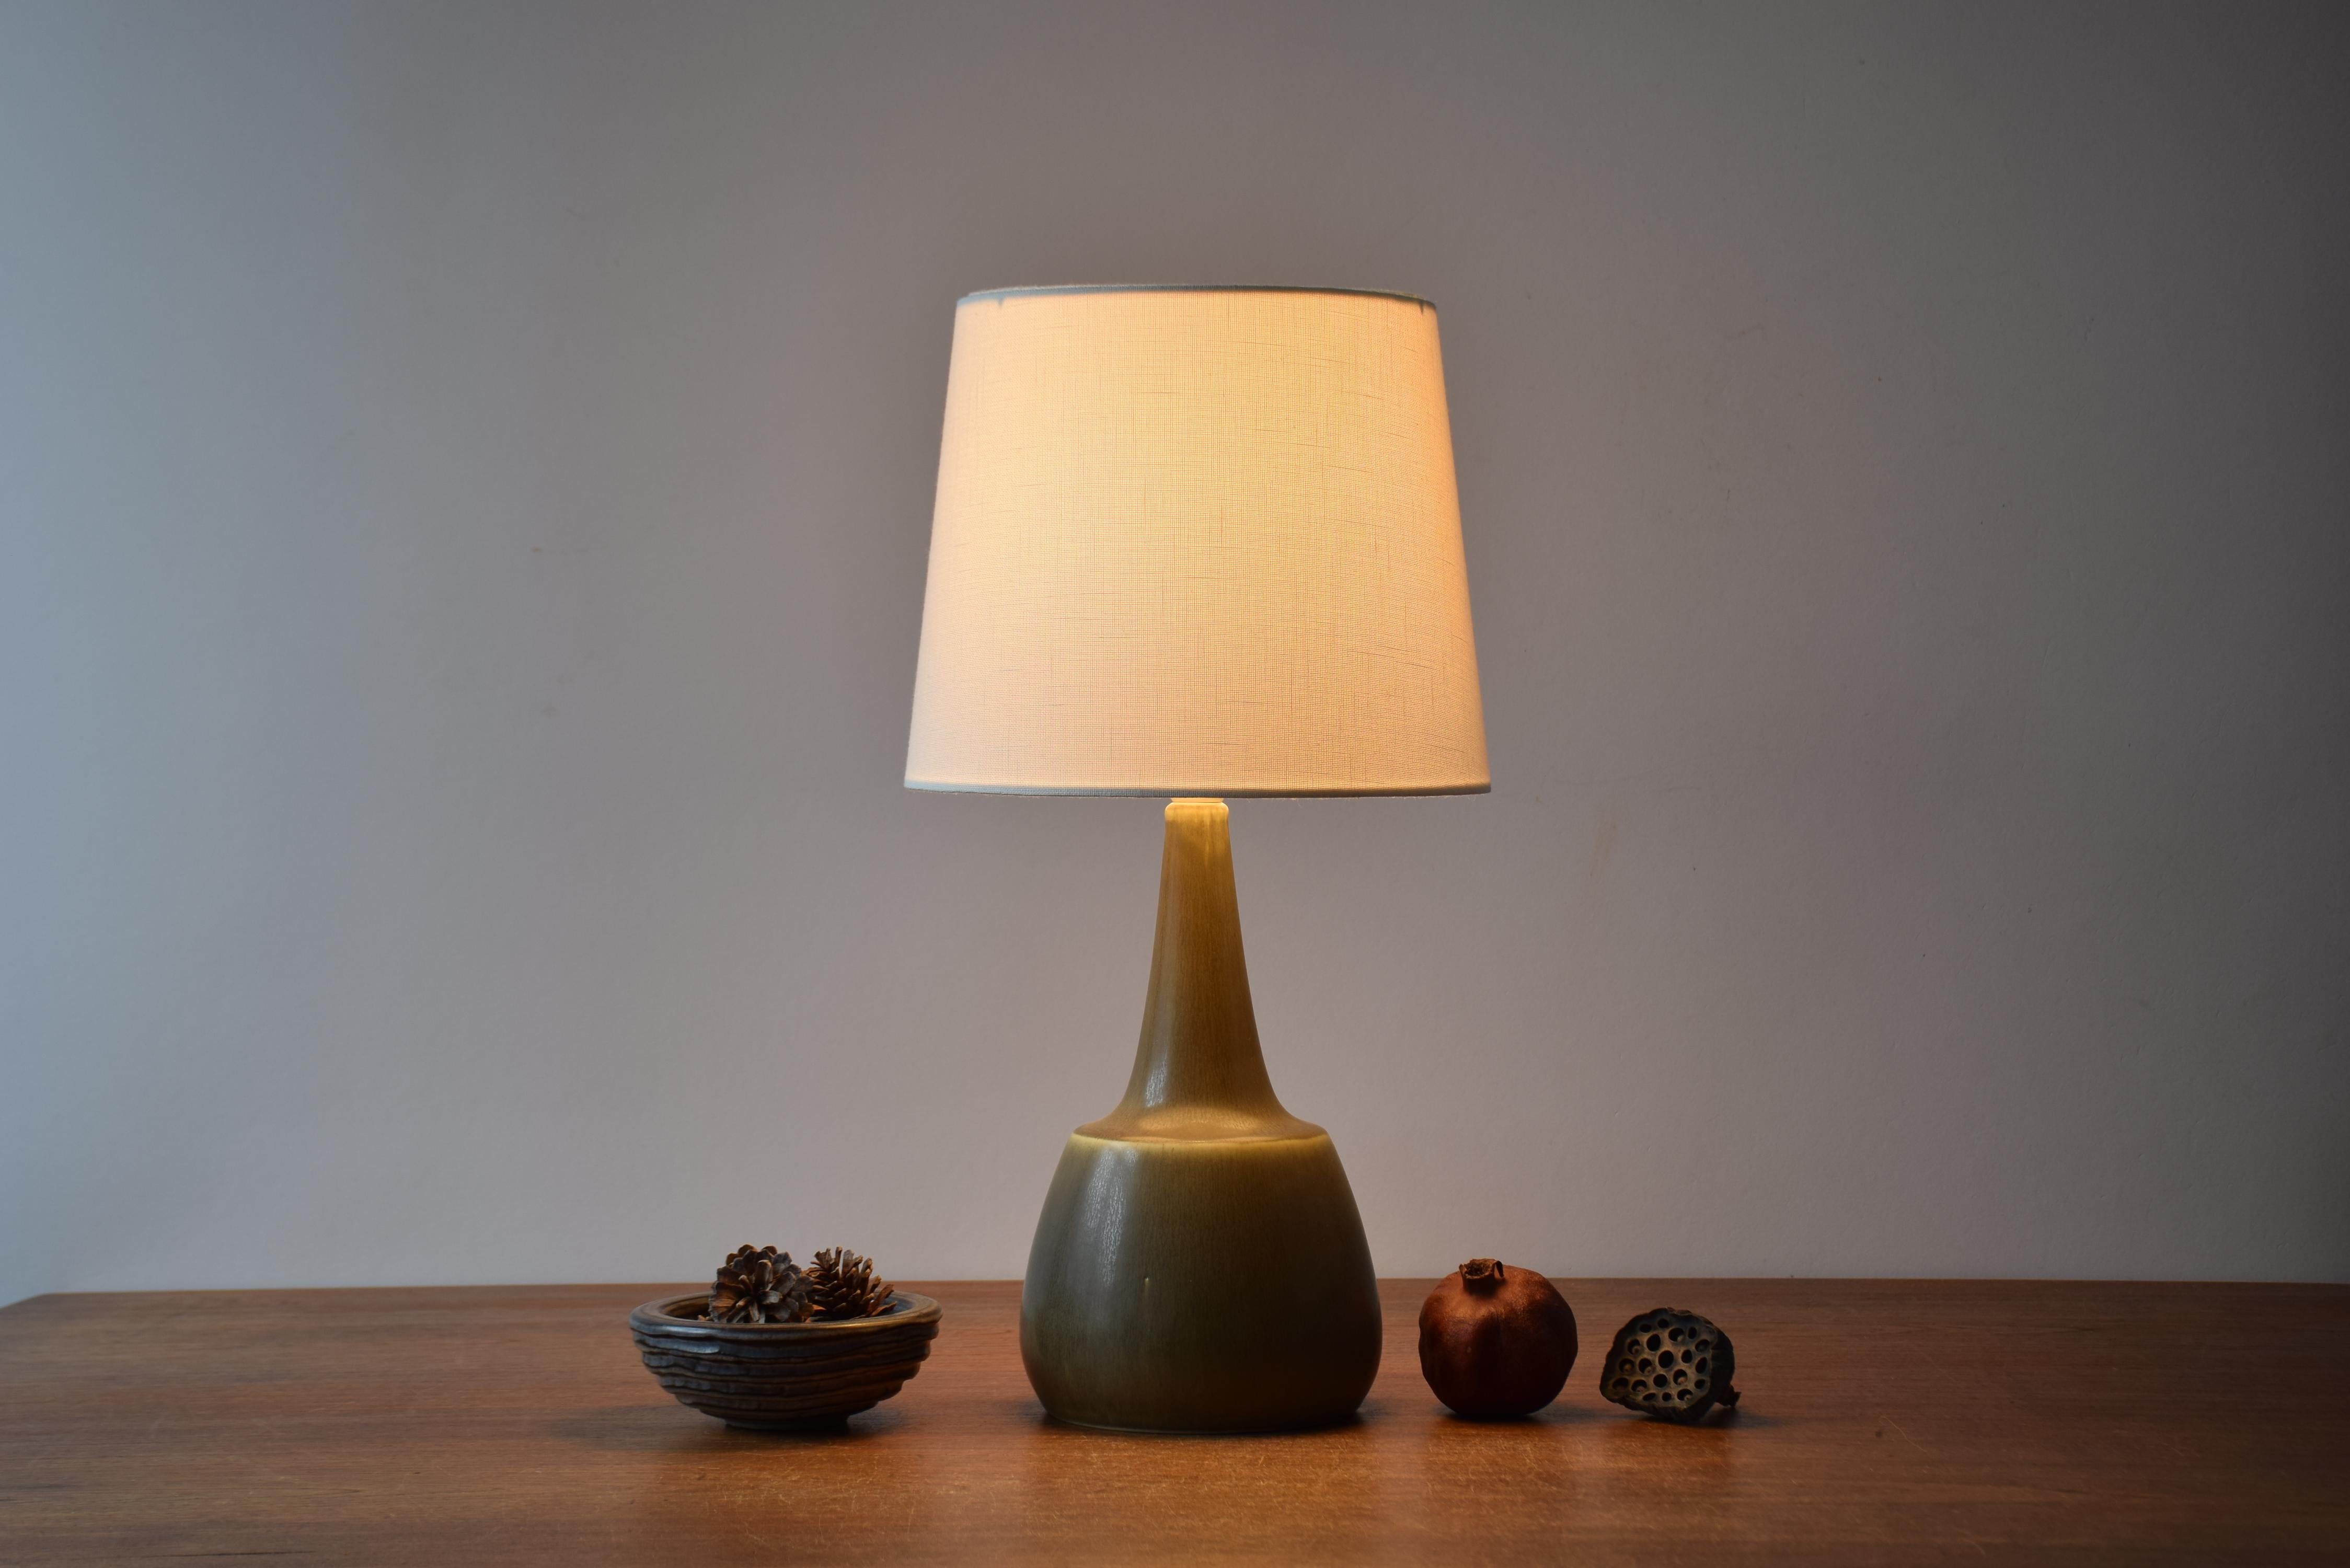 Midcentury table lamp from the Danish ceramic workshop Palshus. 
The lamp was designed by Per Linnemann-Schmidt and manufactured late 1950s or 1960s.

The lamp features an olive green / khaki haresfur glaze.

Included is a new lampshade designed and